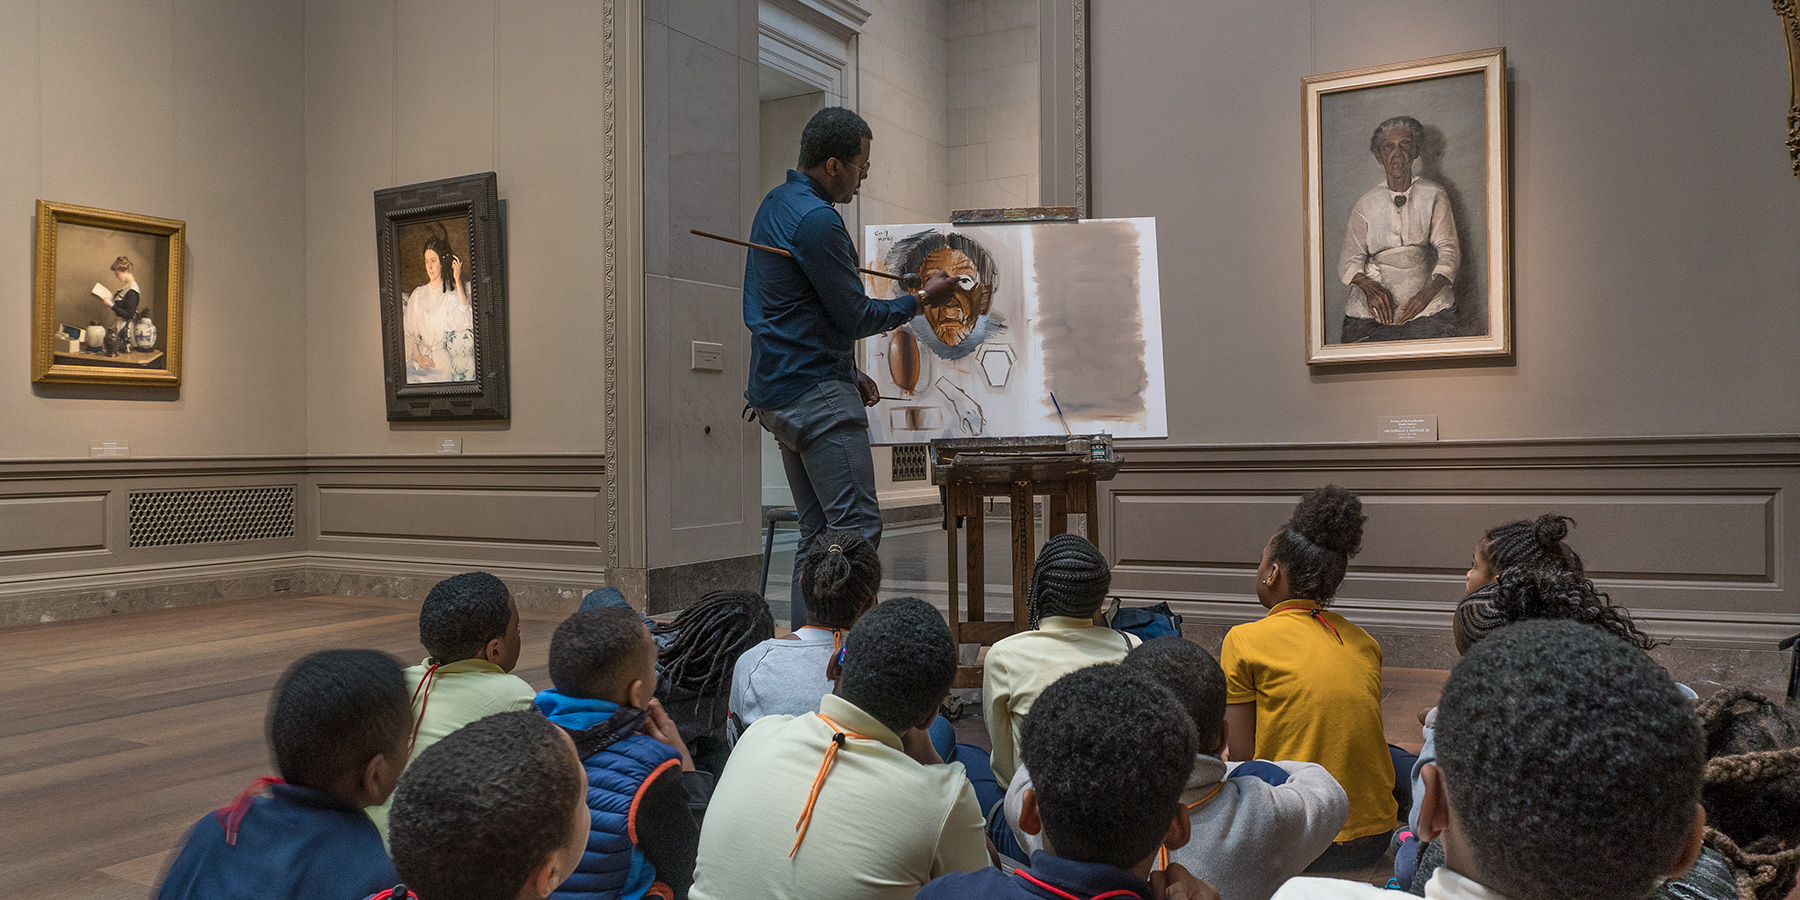 A man is painting a copy in the National Gallery of a painting in our collection as elementary school children are gathered around him watching him work.